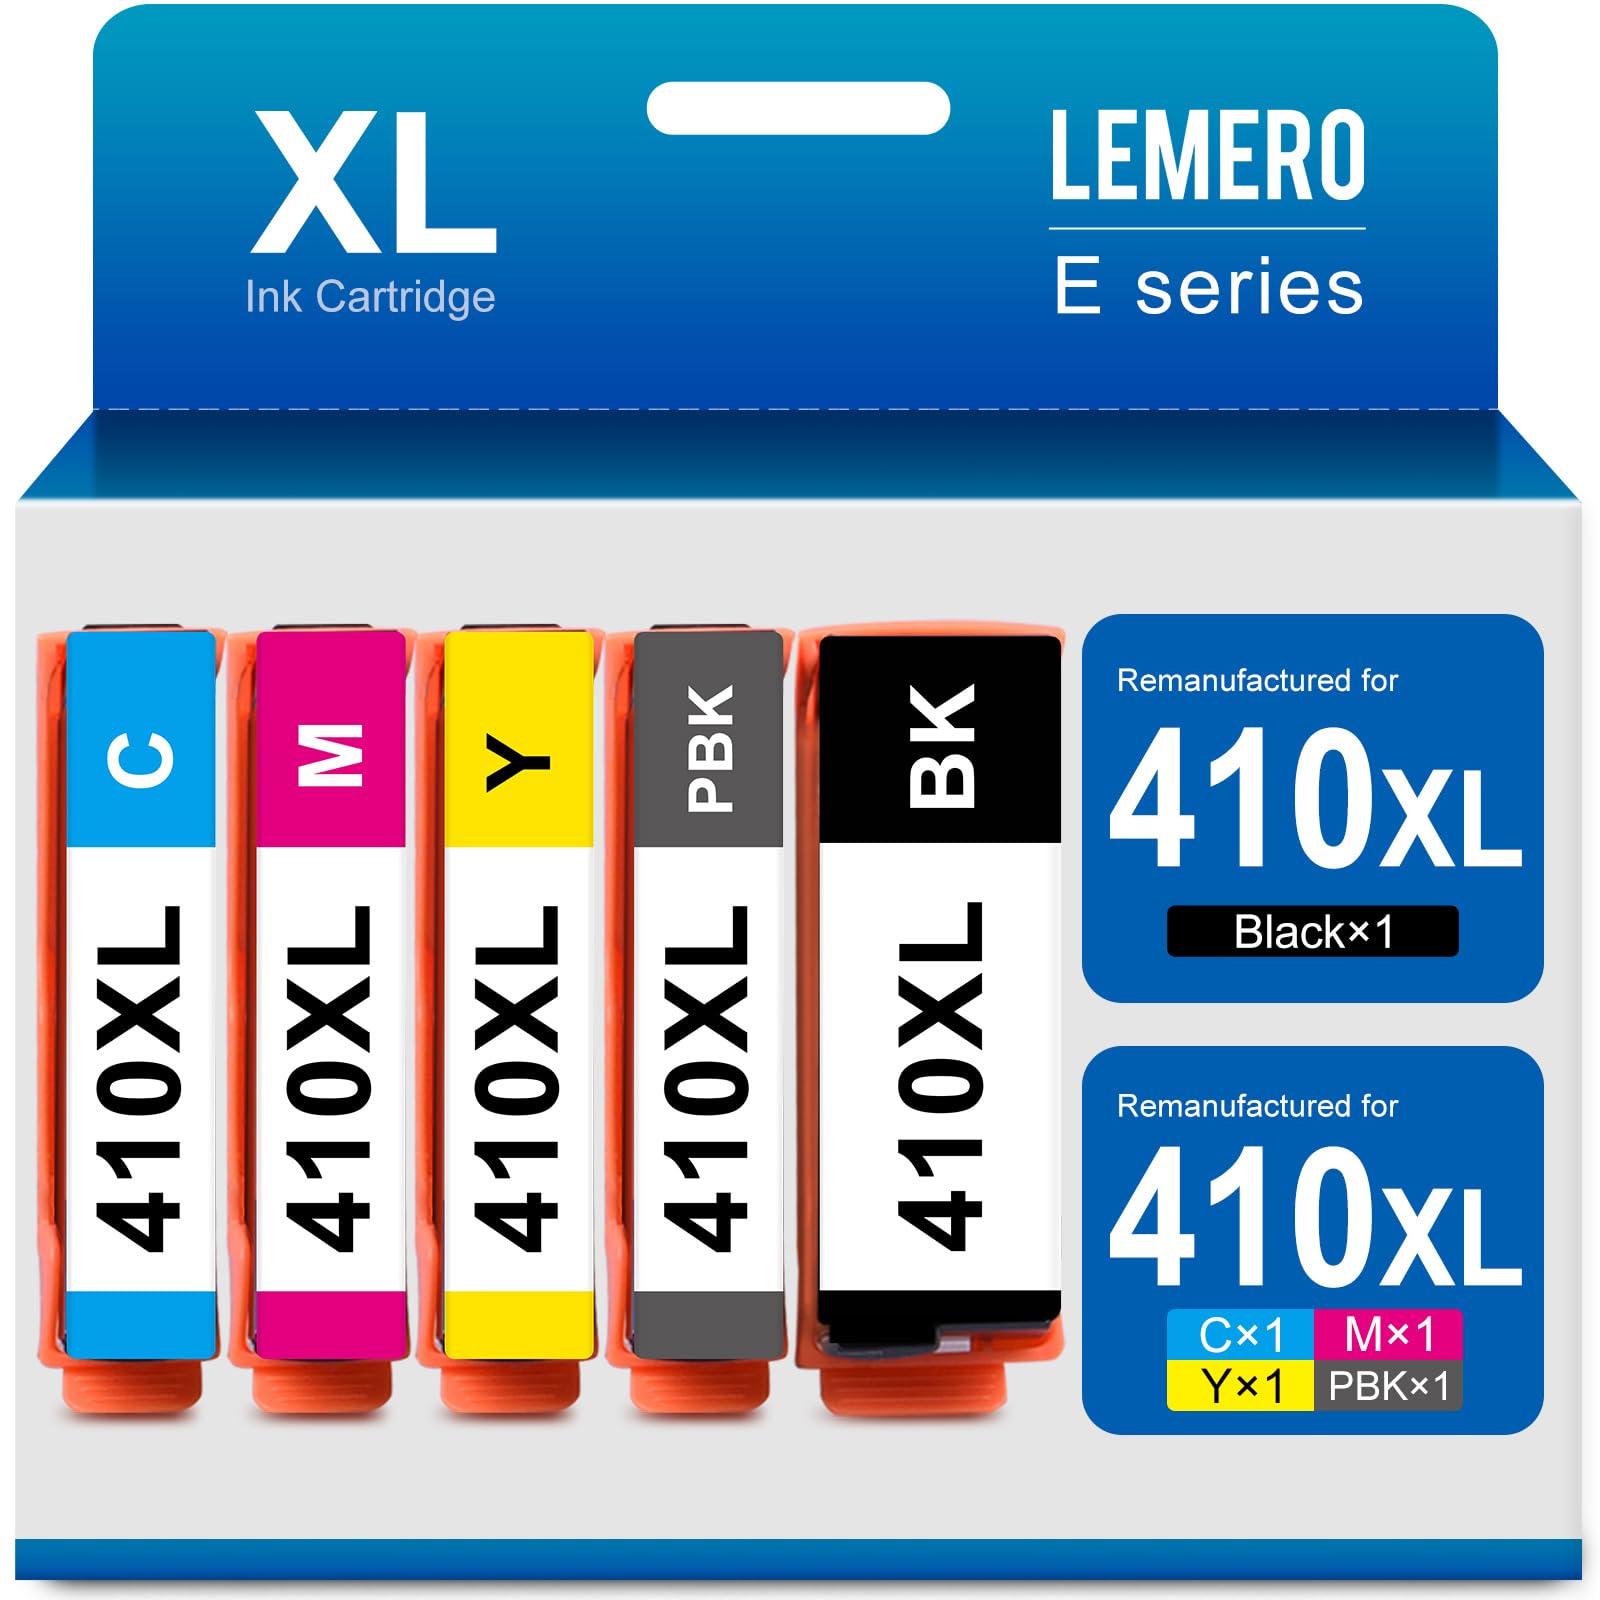 LEMERO XL ink cartridge set for 410XL including black, cyan, magenta, yellow, and photo black